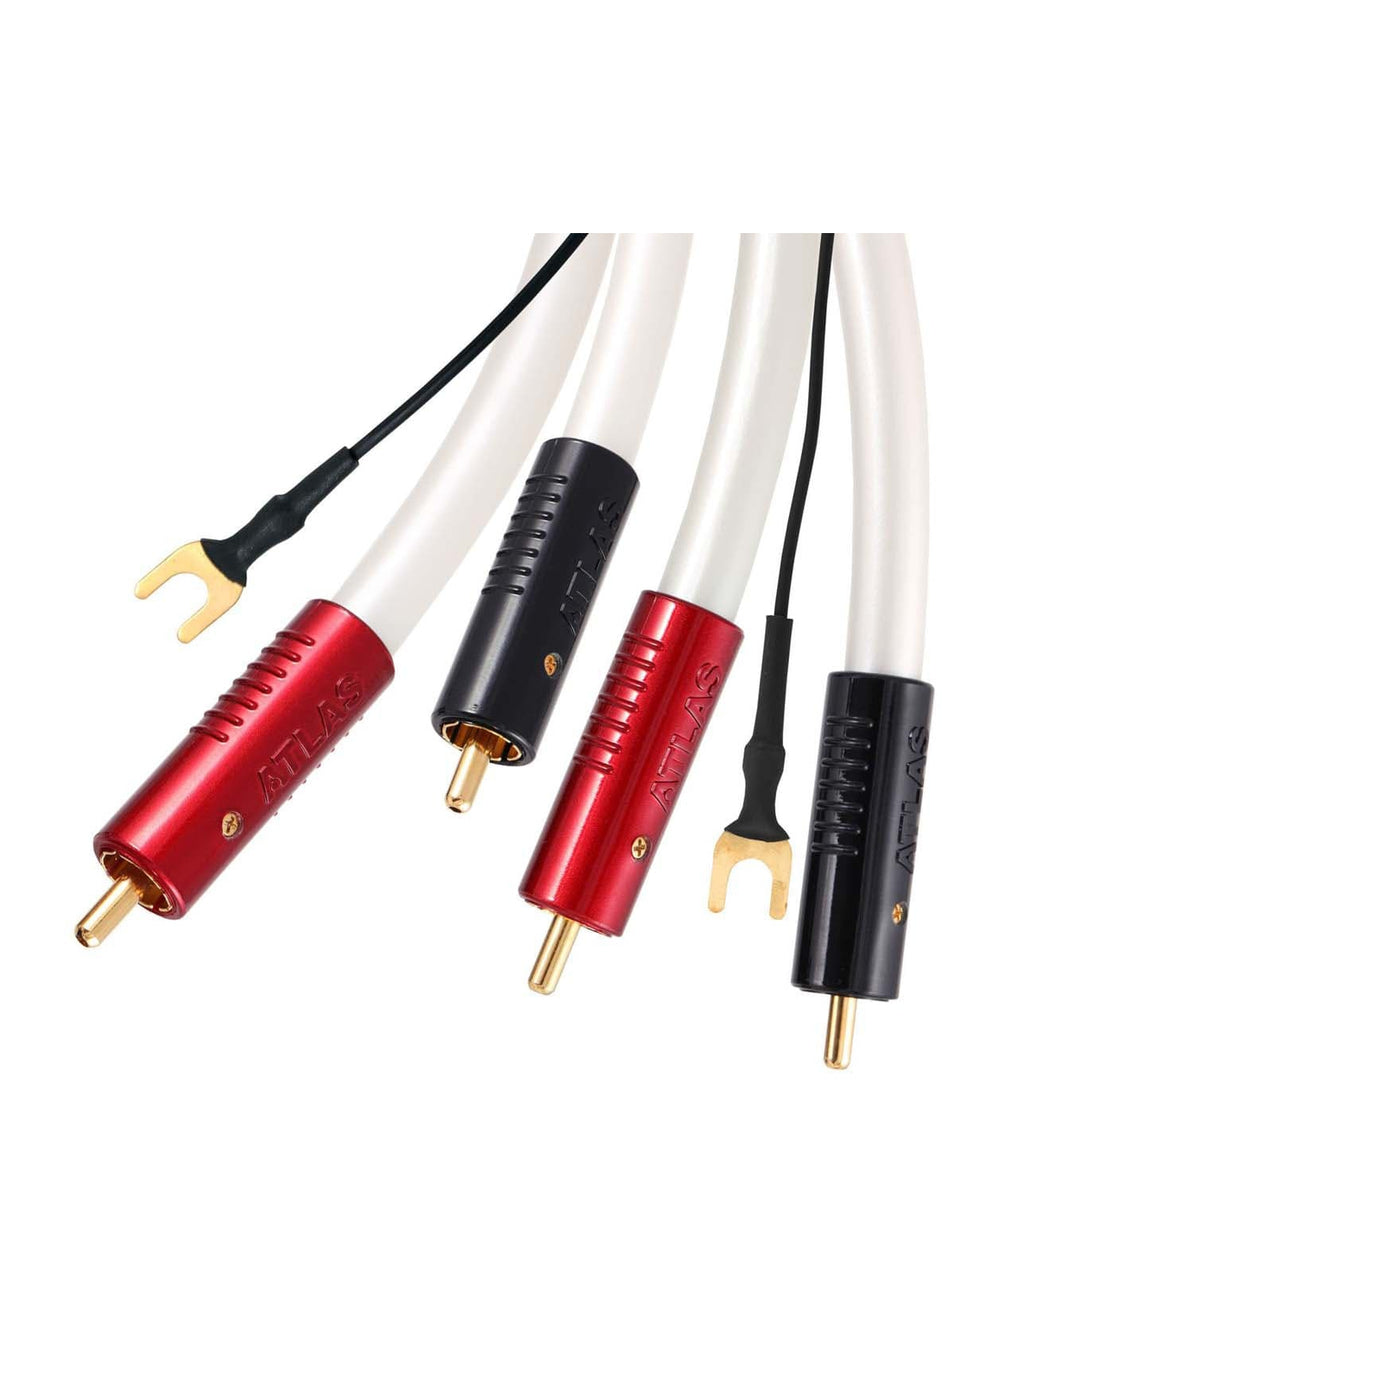 Atlas Equator Achromatic RCA Turntable Cable at Audio Influence